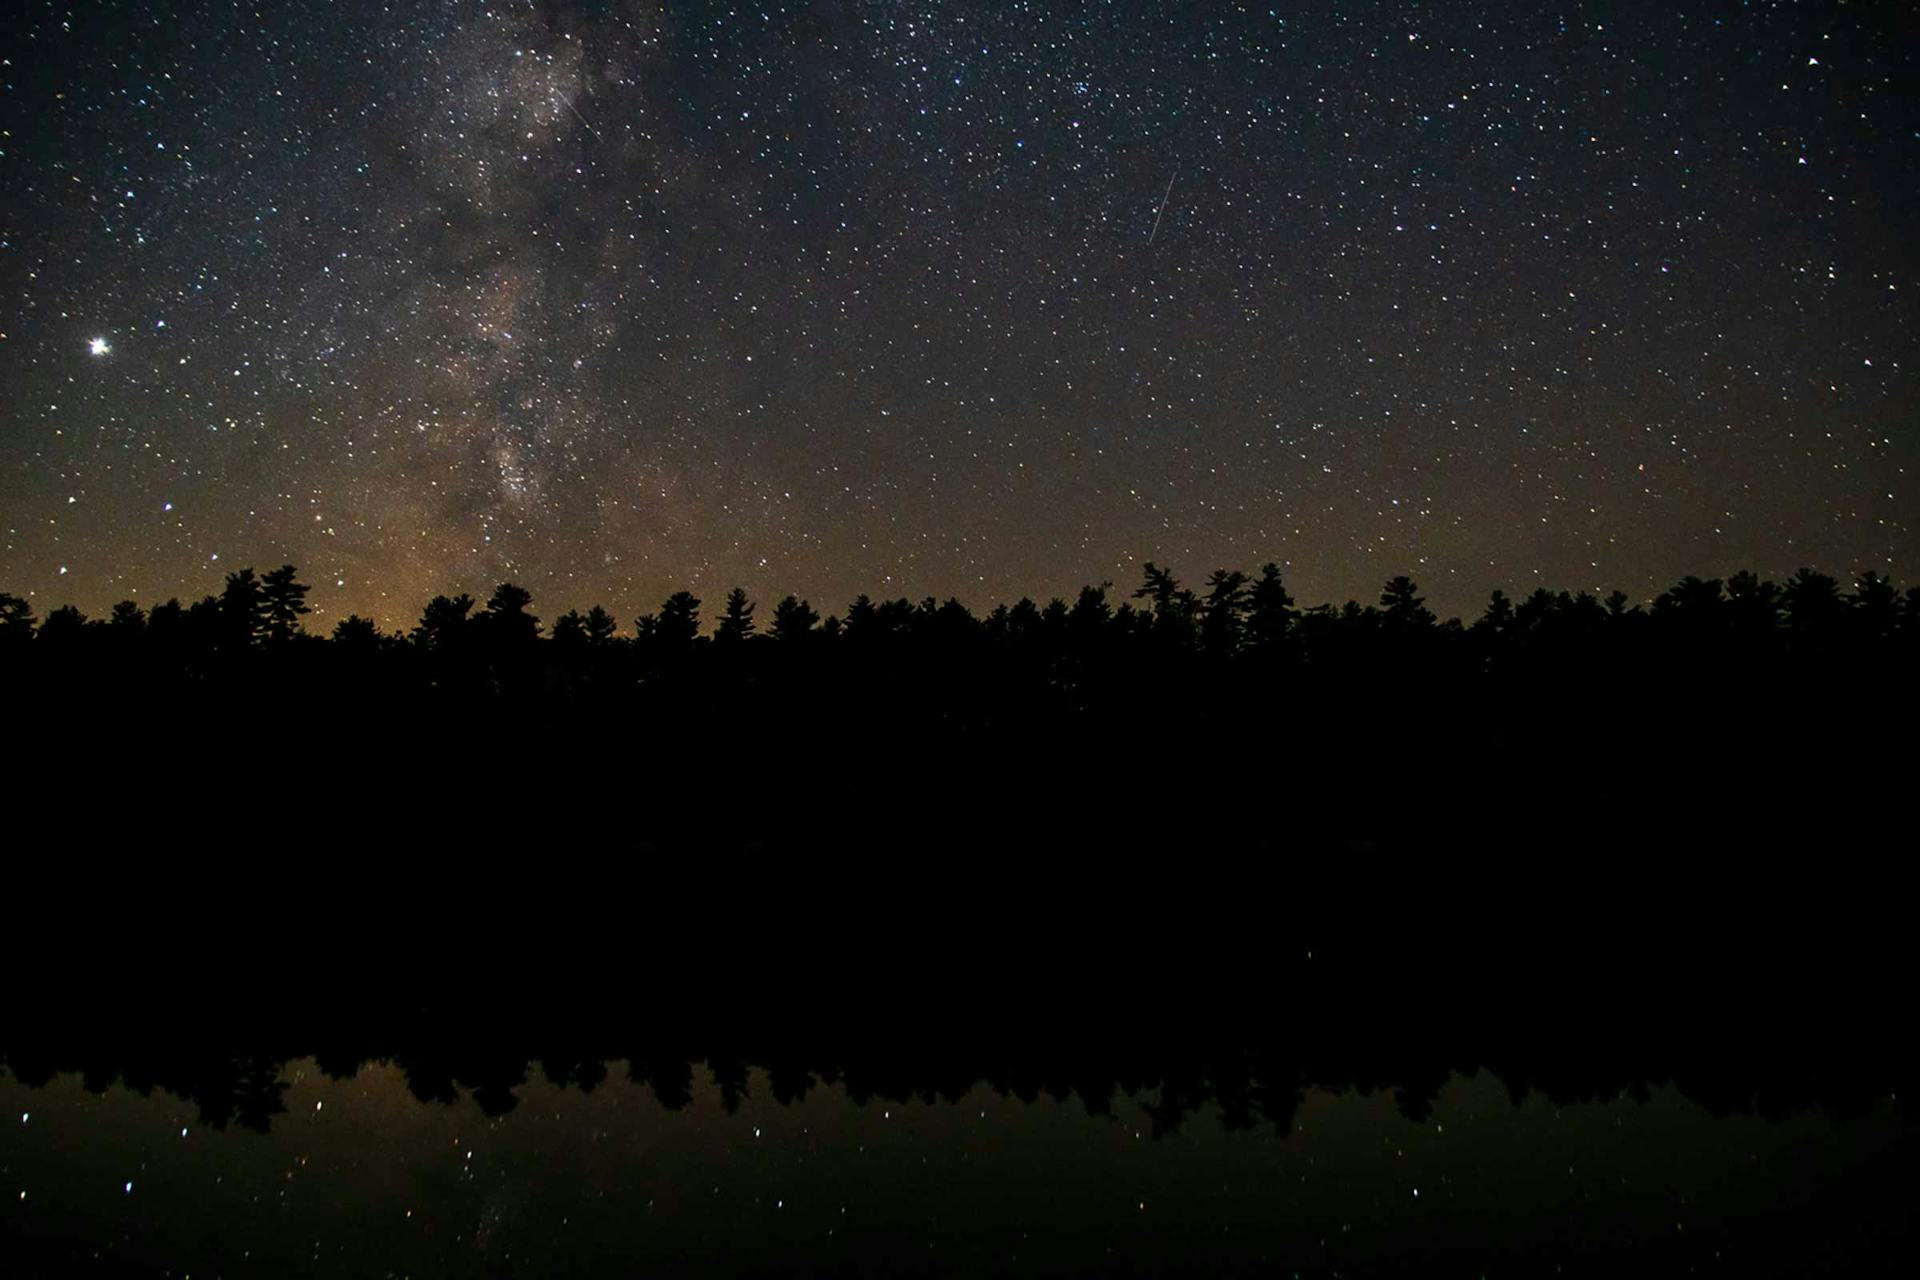 Stargazing Tools and Tips to Light Up Your Night